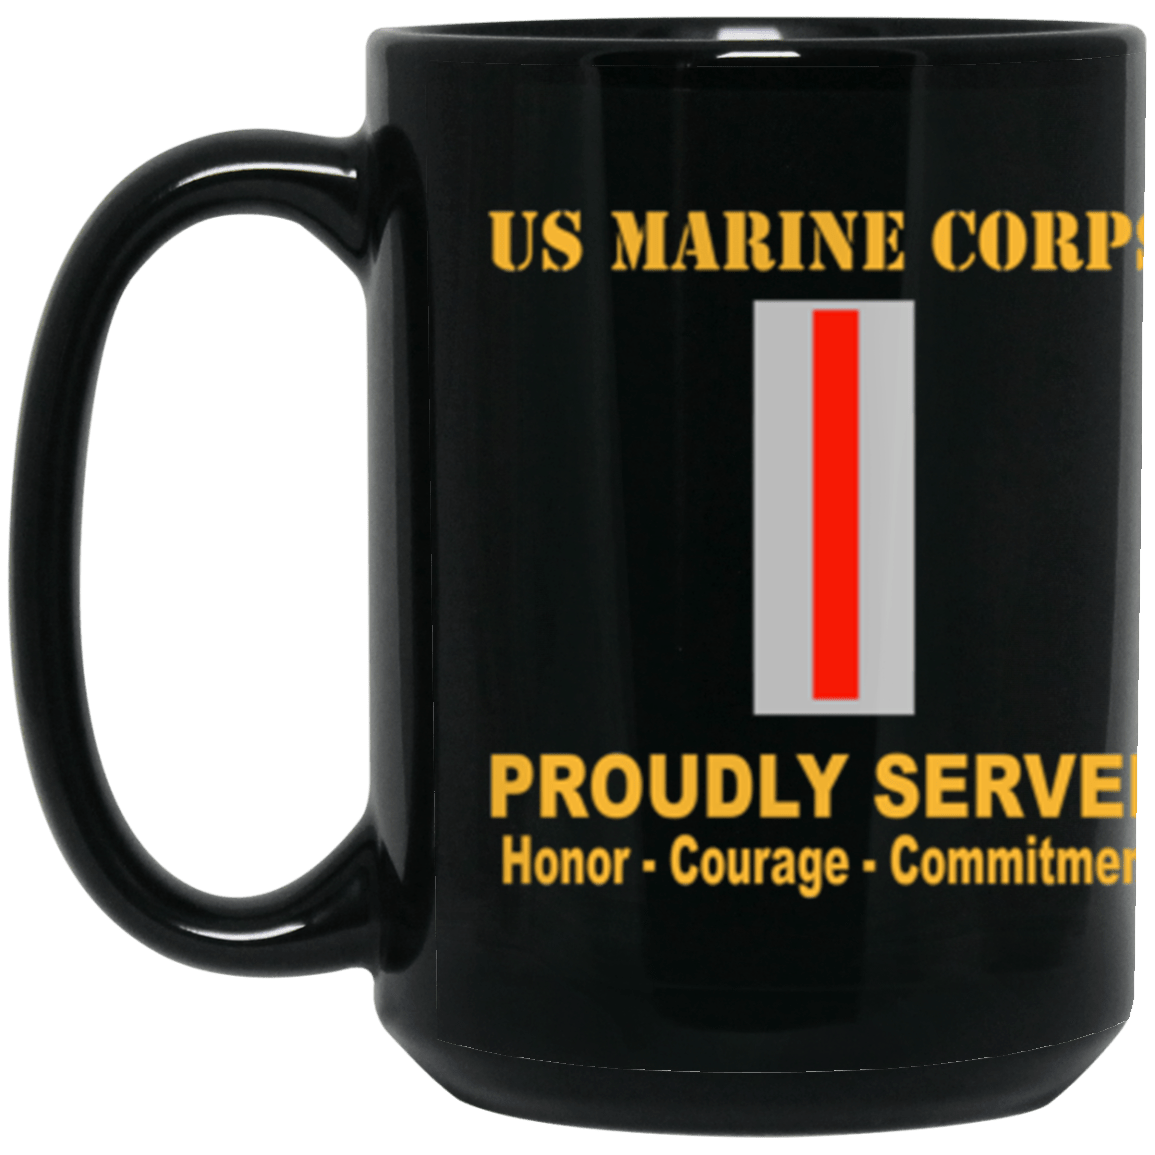 USMC W-5 Chief Warrant Officer 5 CW5 CW5 Warrant Officer Ranks Proudly Served Core Values 15 oz. Black Mug